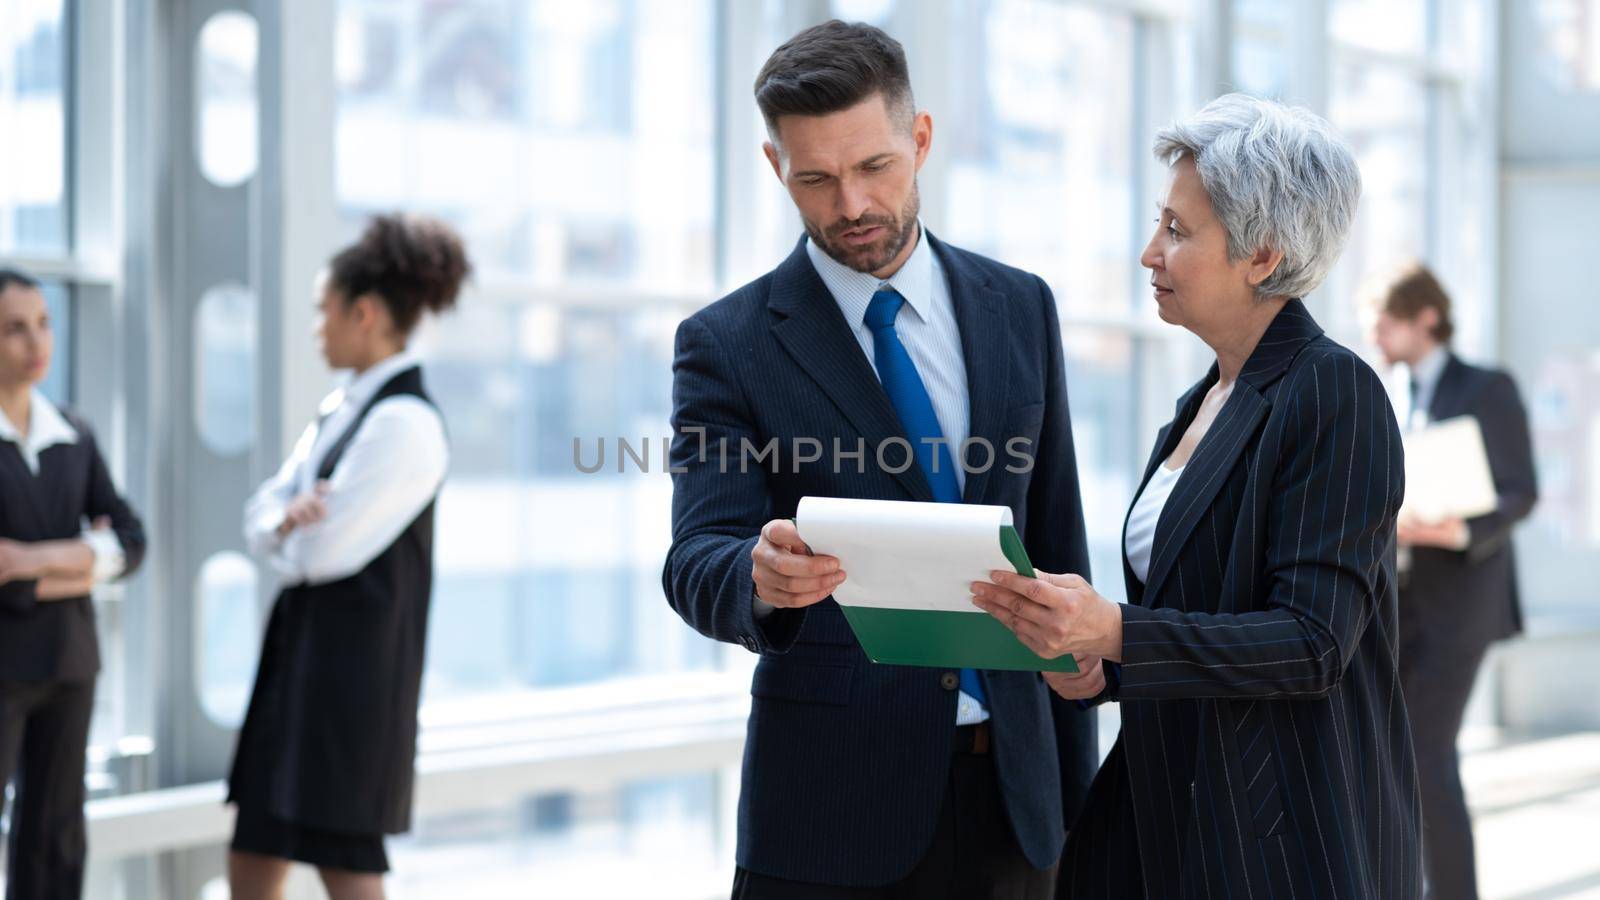 Meeting of group of business people in the office standing in front of a large window working with documents